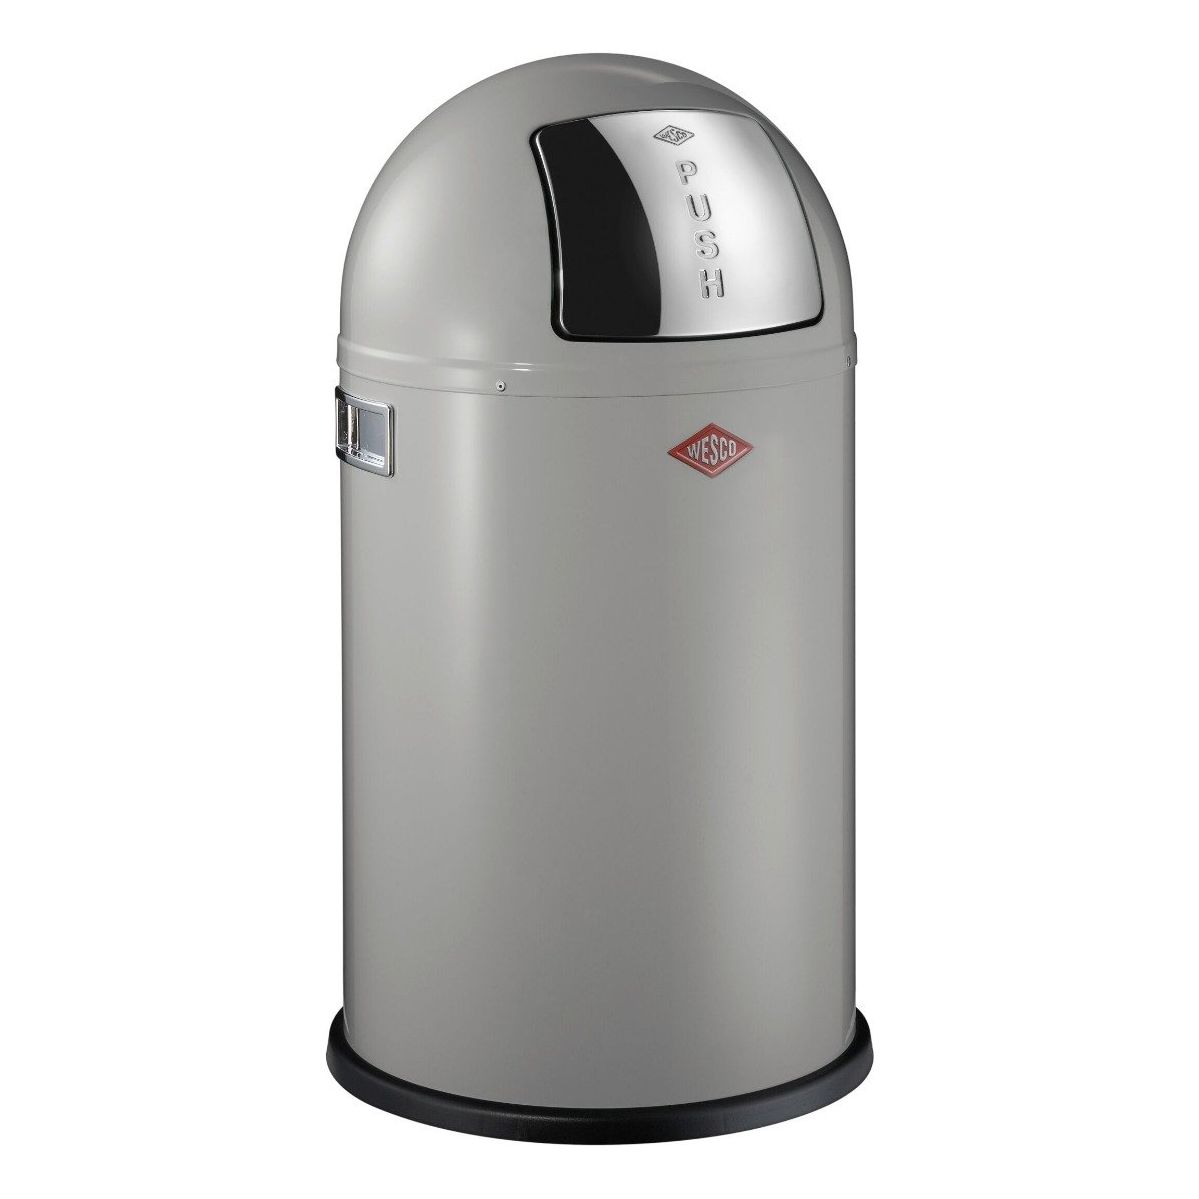 Wesco Pushboy Junior Single Compartment 22 Litre Kitchen Bin in Cool Grey: 175531-76